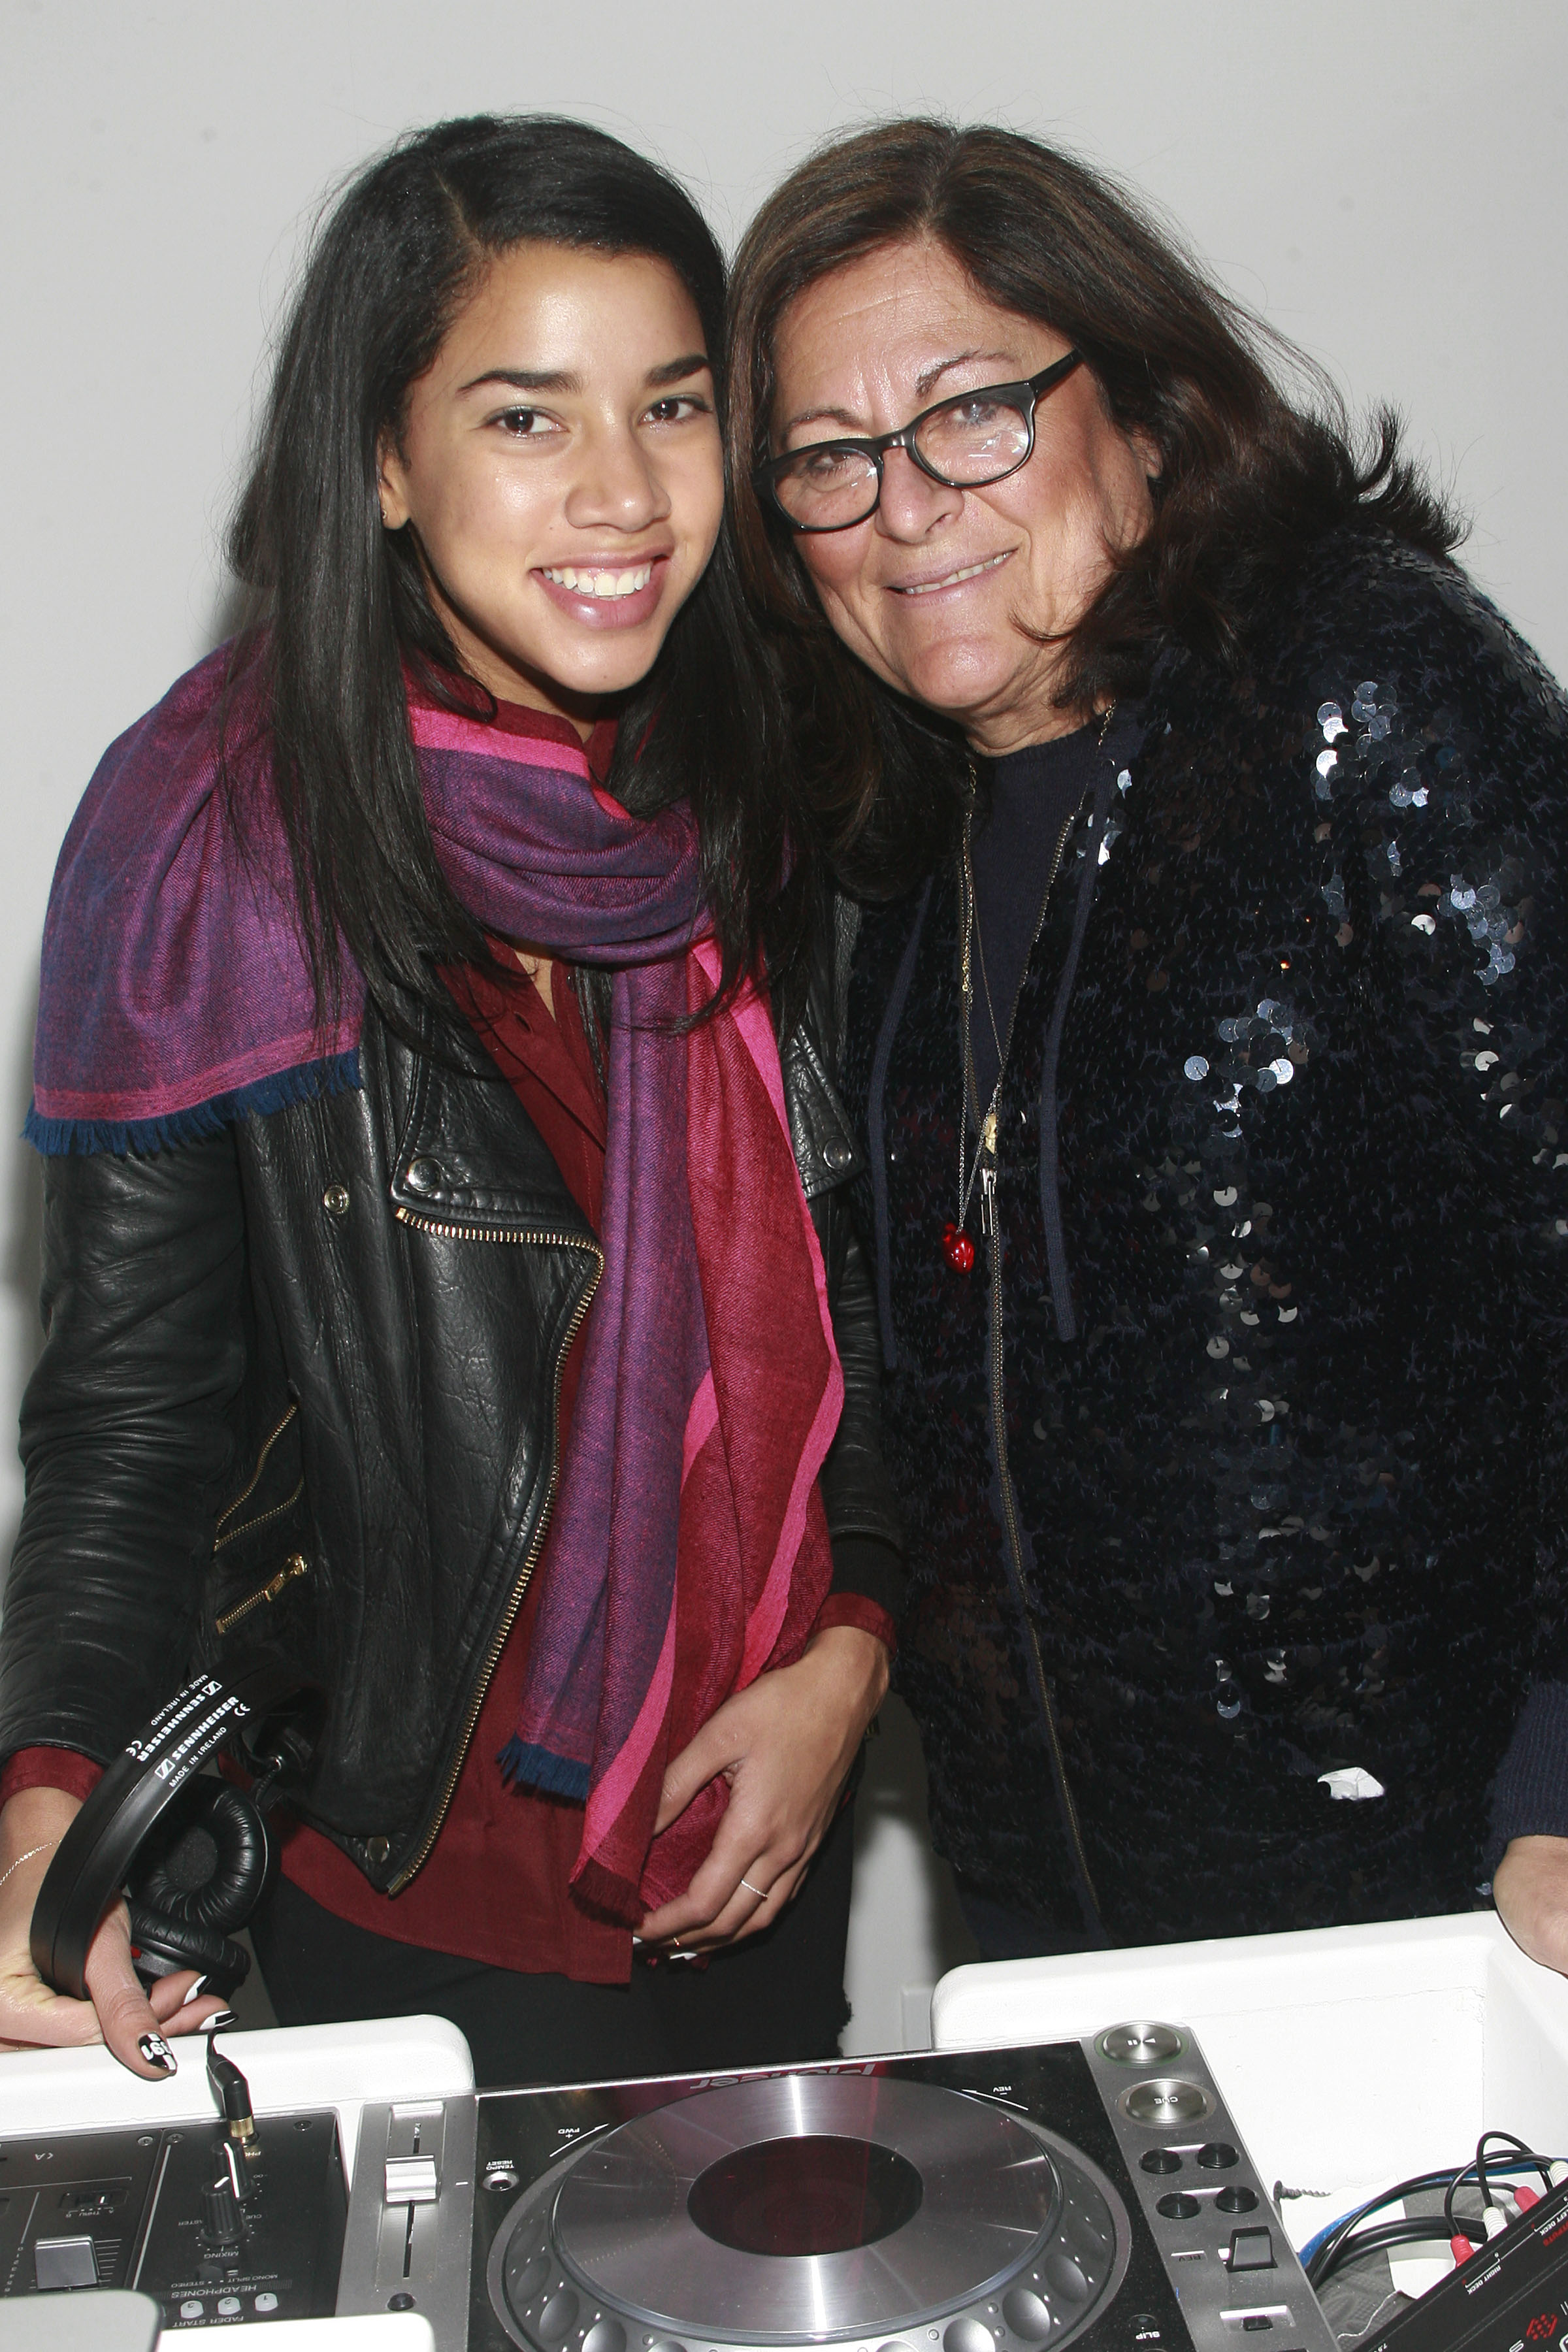 Hannah Bronfman DJ'd while cozying up to Fern Mallis at a Maiyet & Lyst launch party.  ©Patrick Mcmullan Sylvain Gaboury/PatrickMcmullan.com